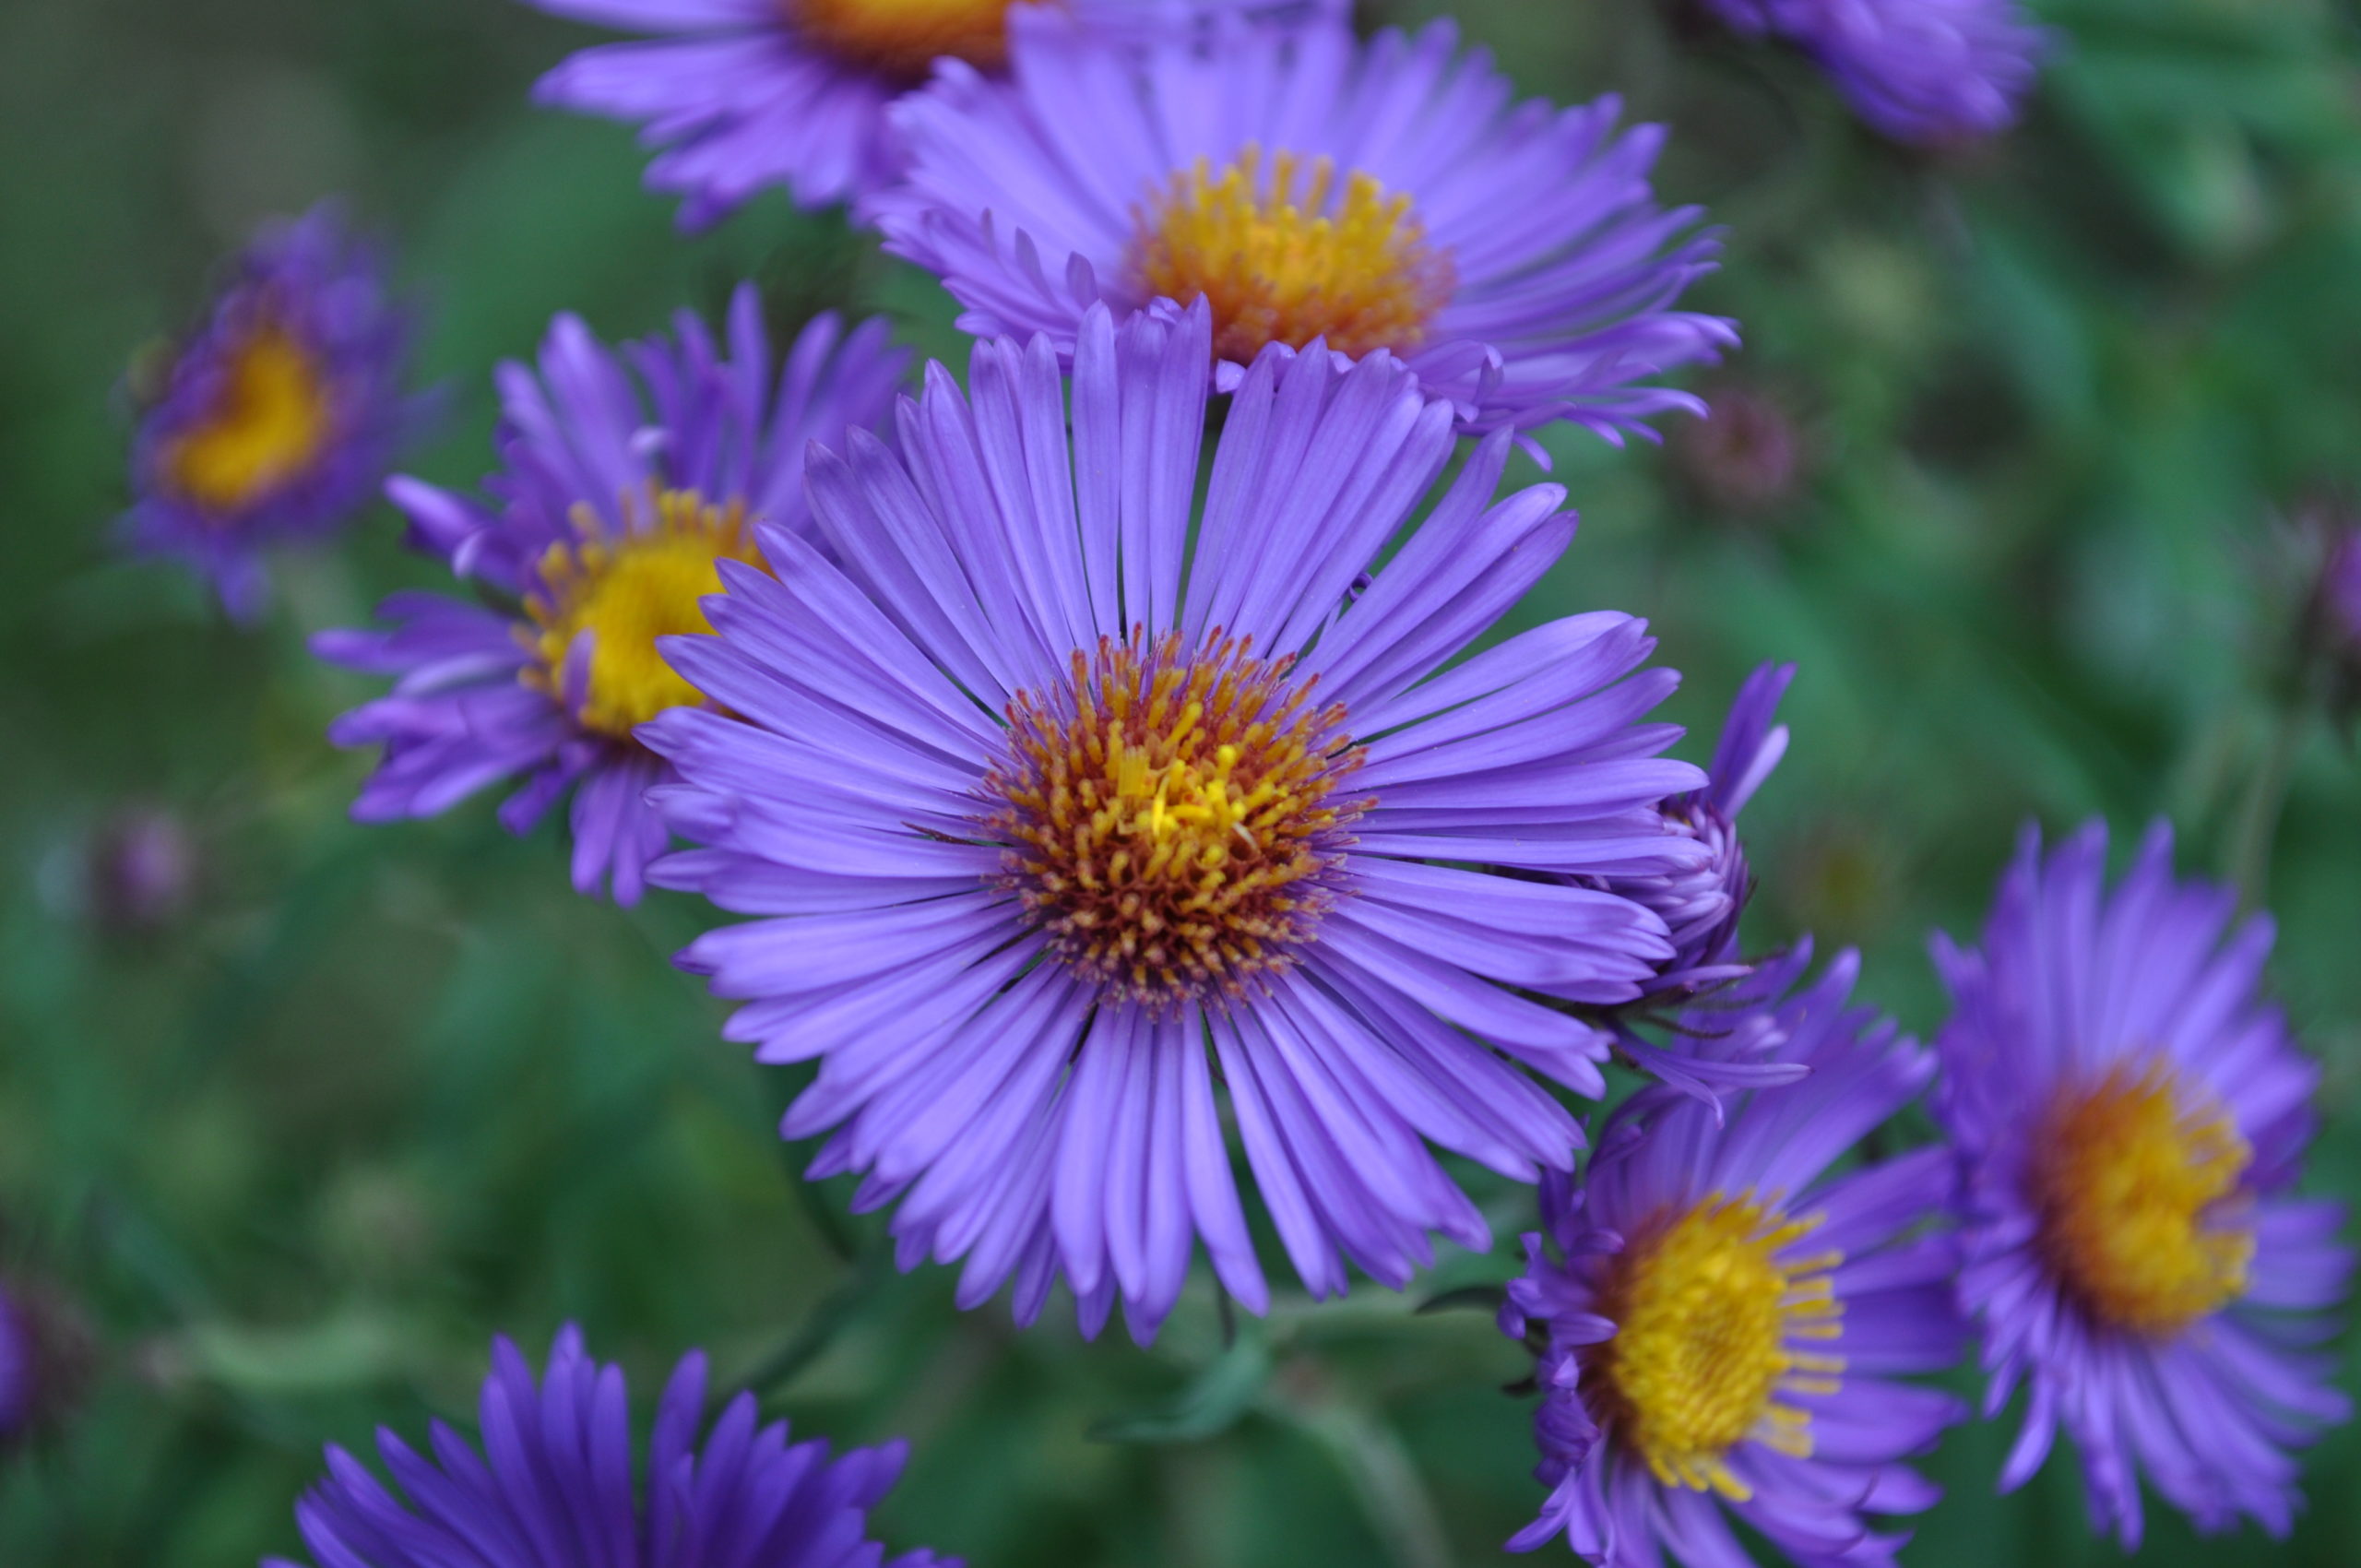 The New York Aster, or Aster novae-belgii,  grows to just over 4 feet tall with flowers ranging in color from lavender to purple and white.  ANDREW MESSINGER